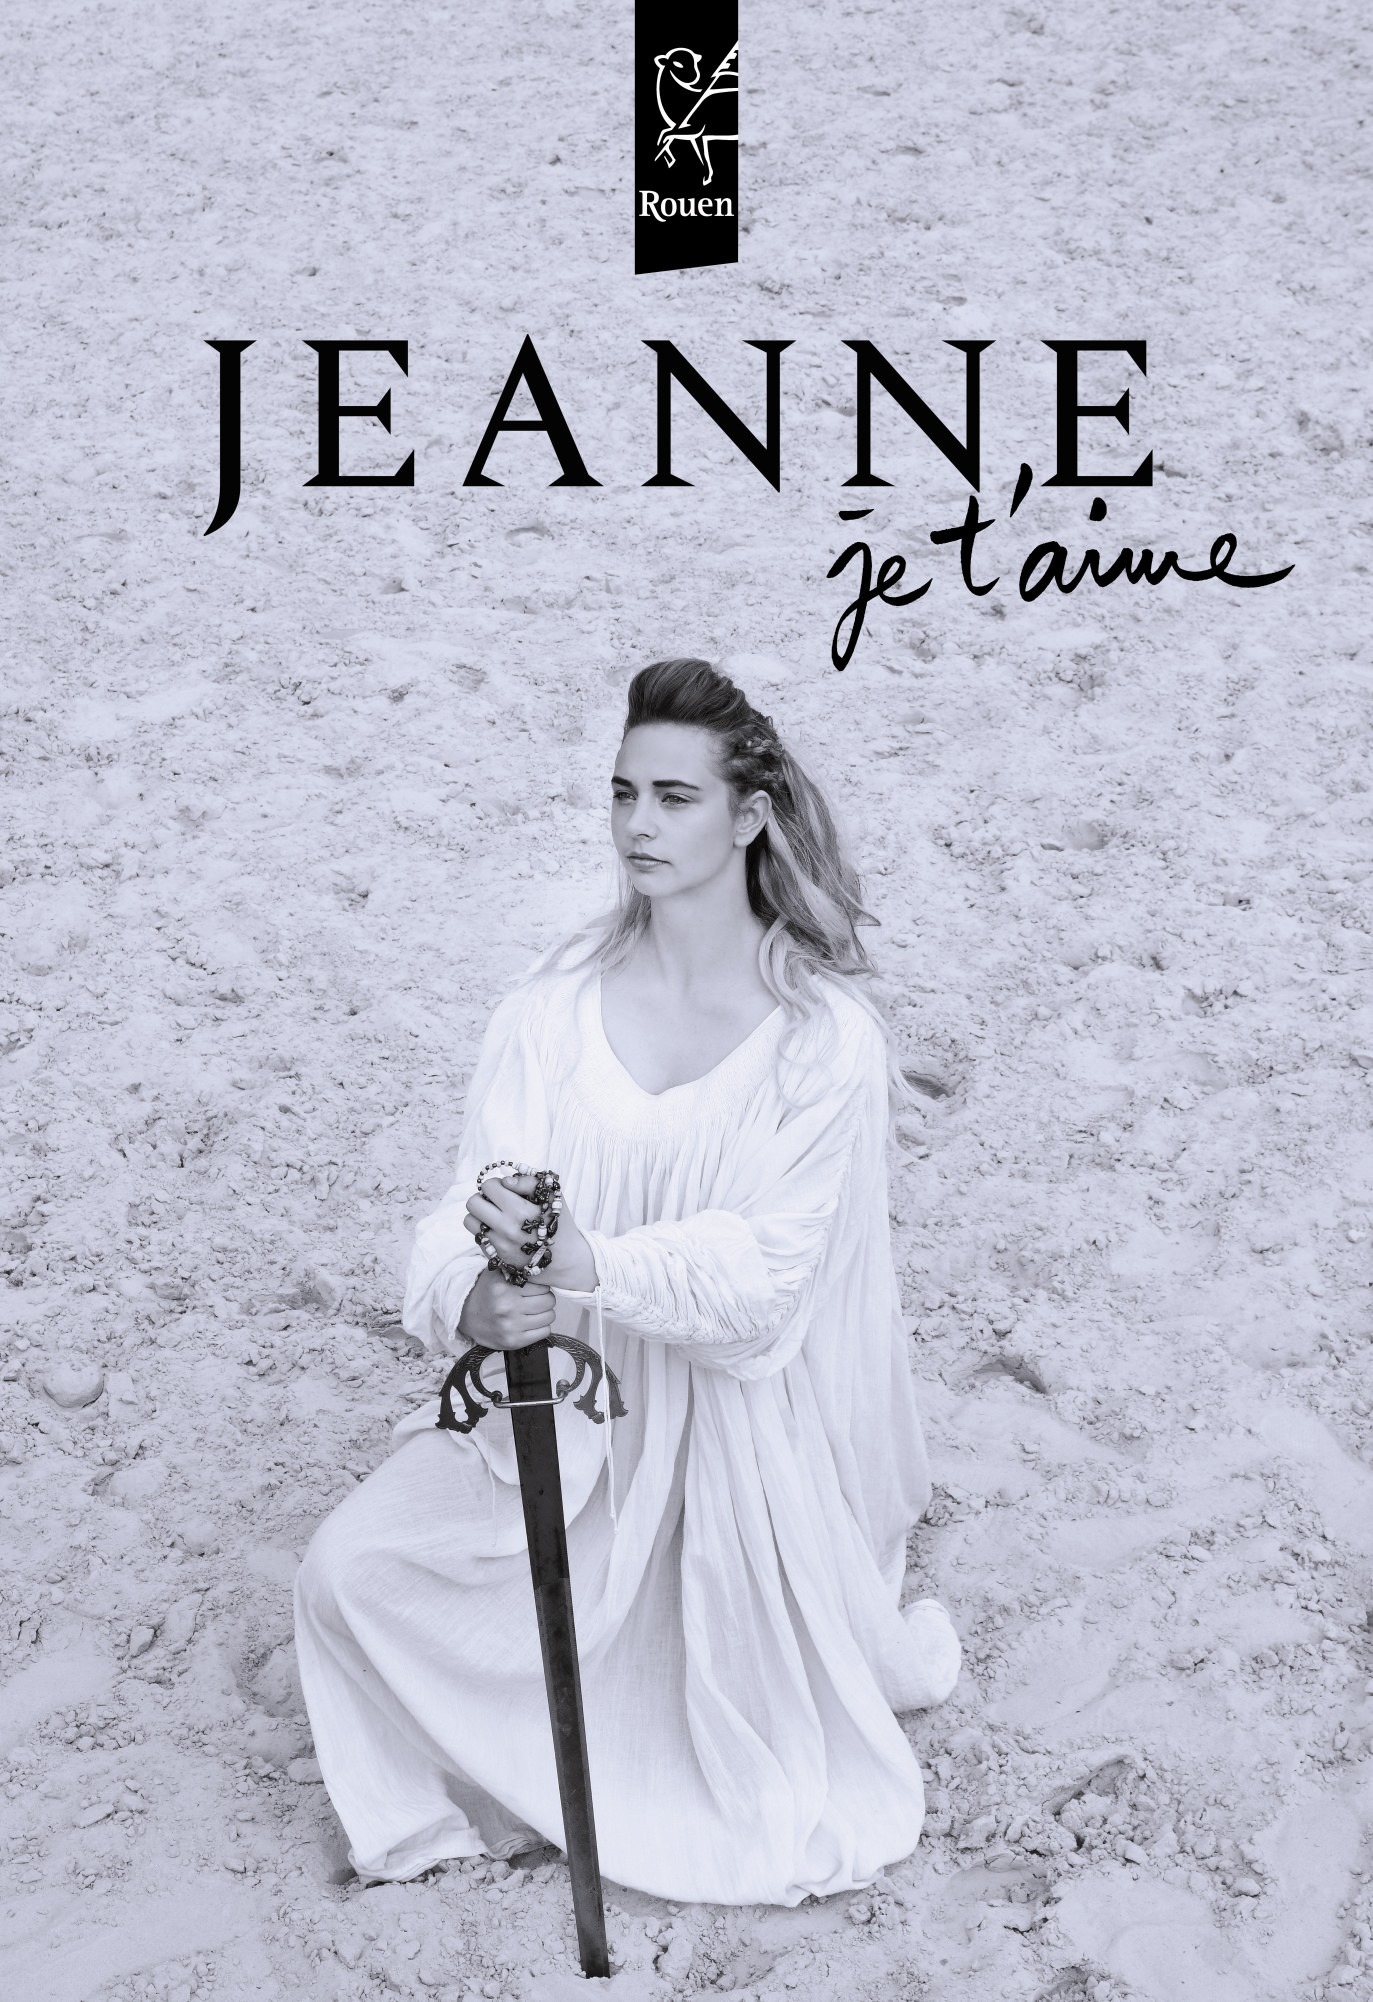 Exposition ``Jeanne, je t'aime``